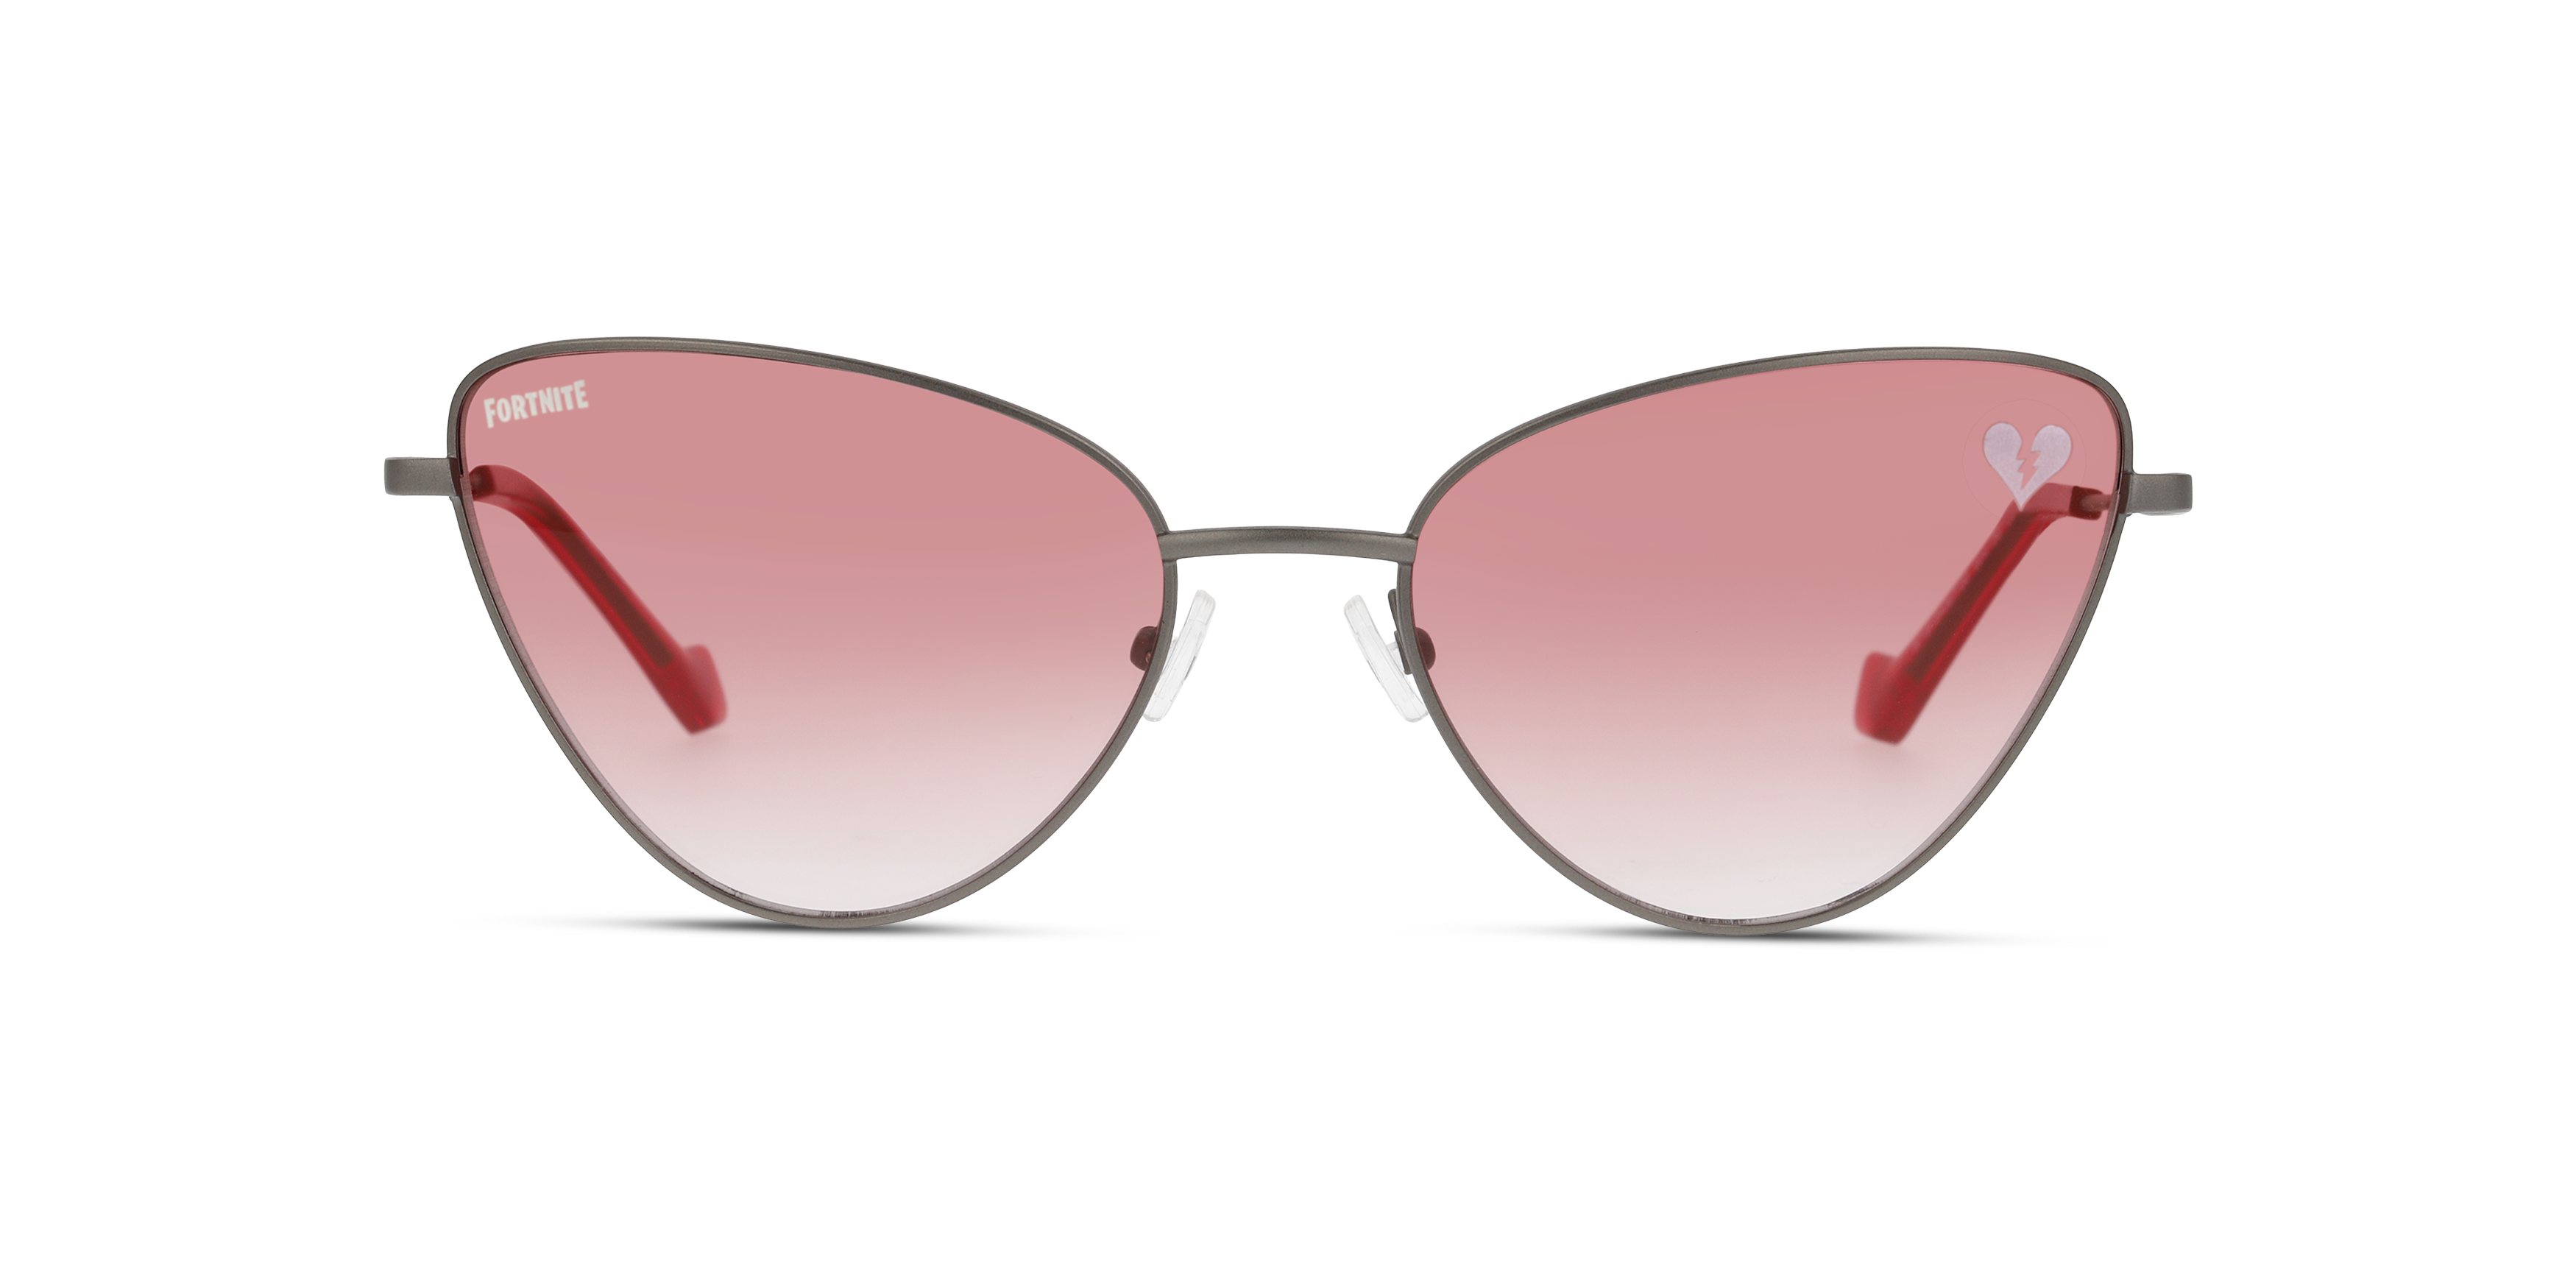 Front Fortnite with Unofficial UNSF0199 Sunglasses Pink / Grey